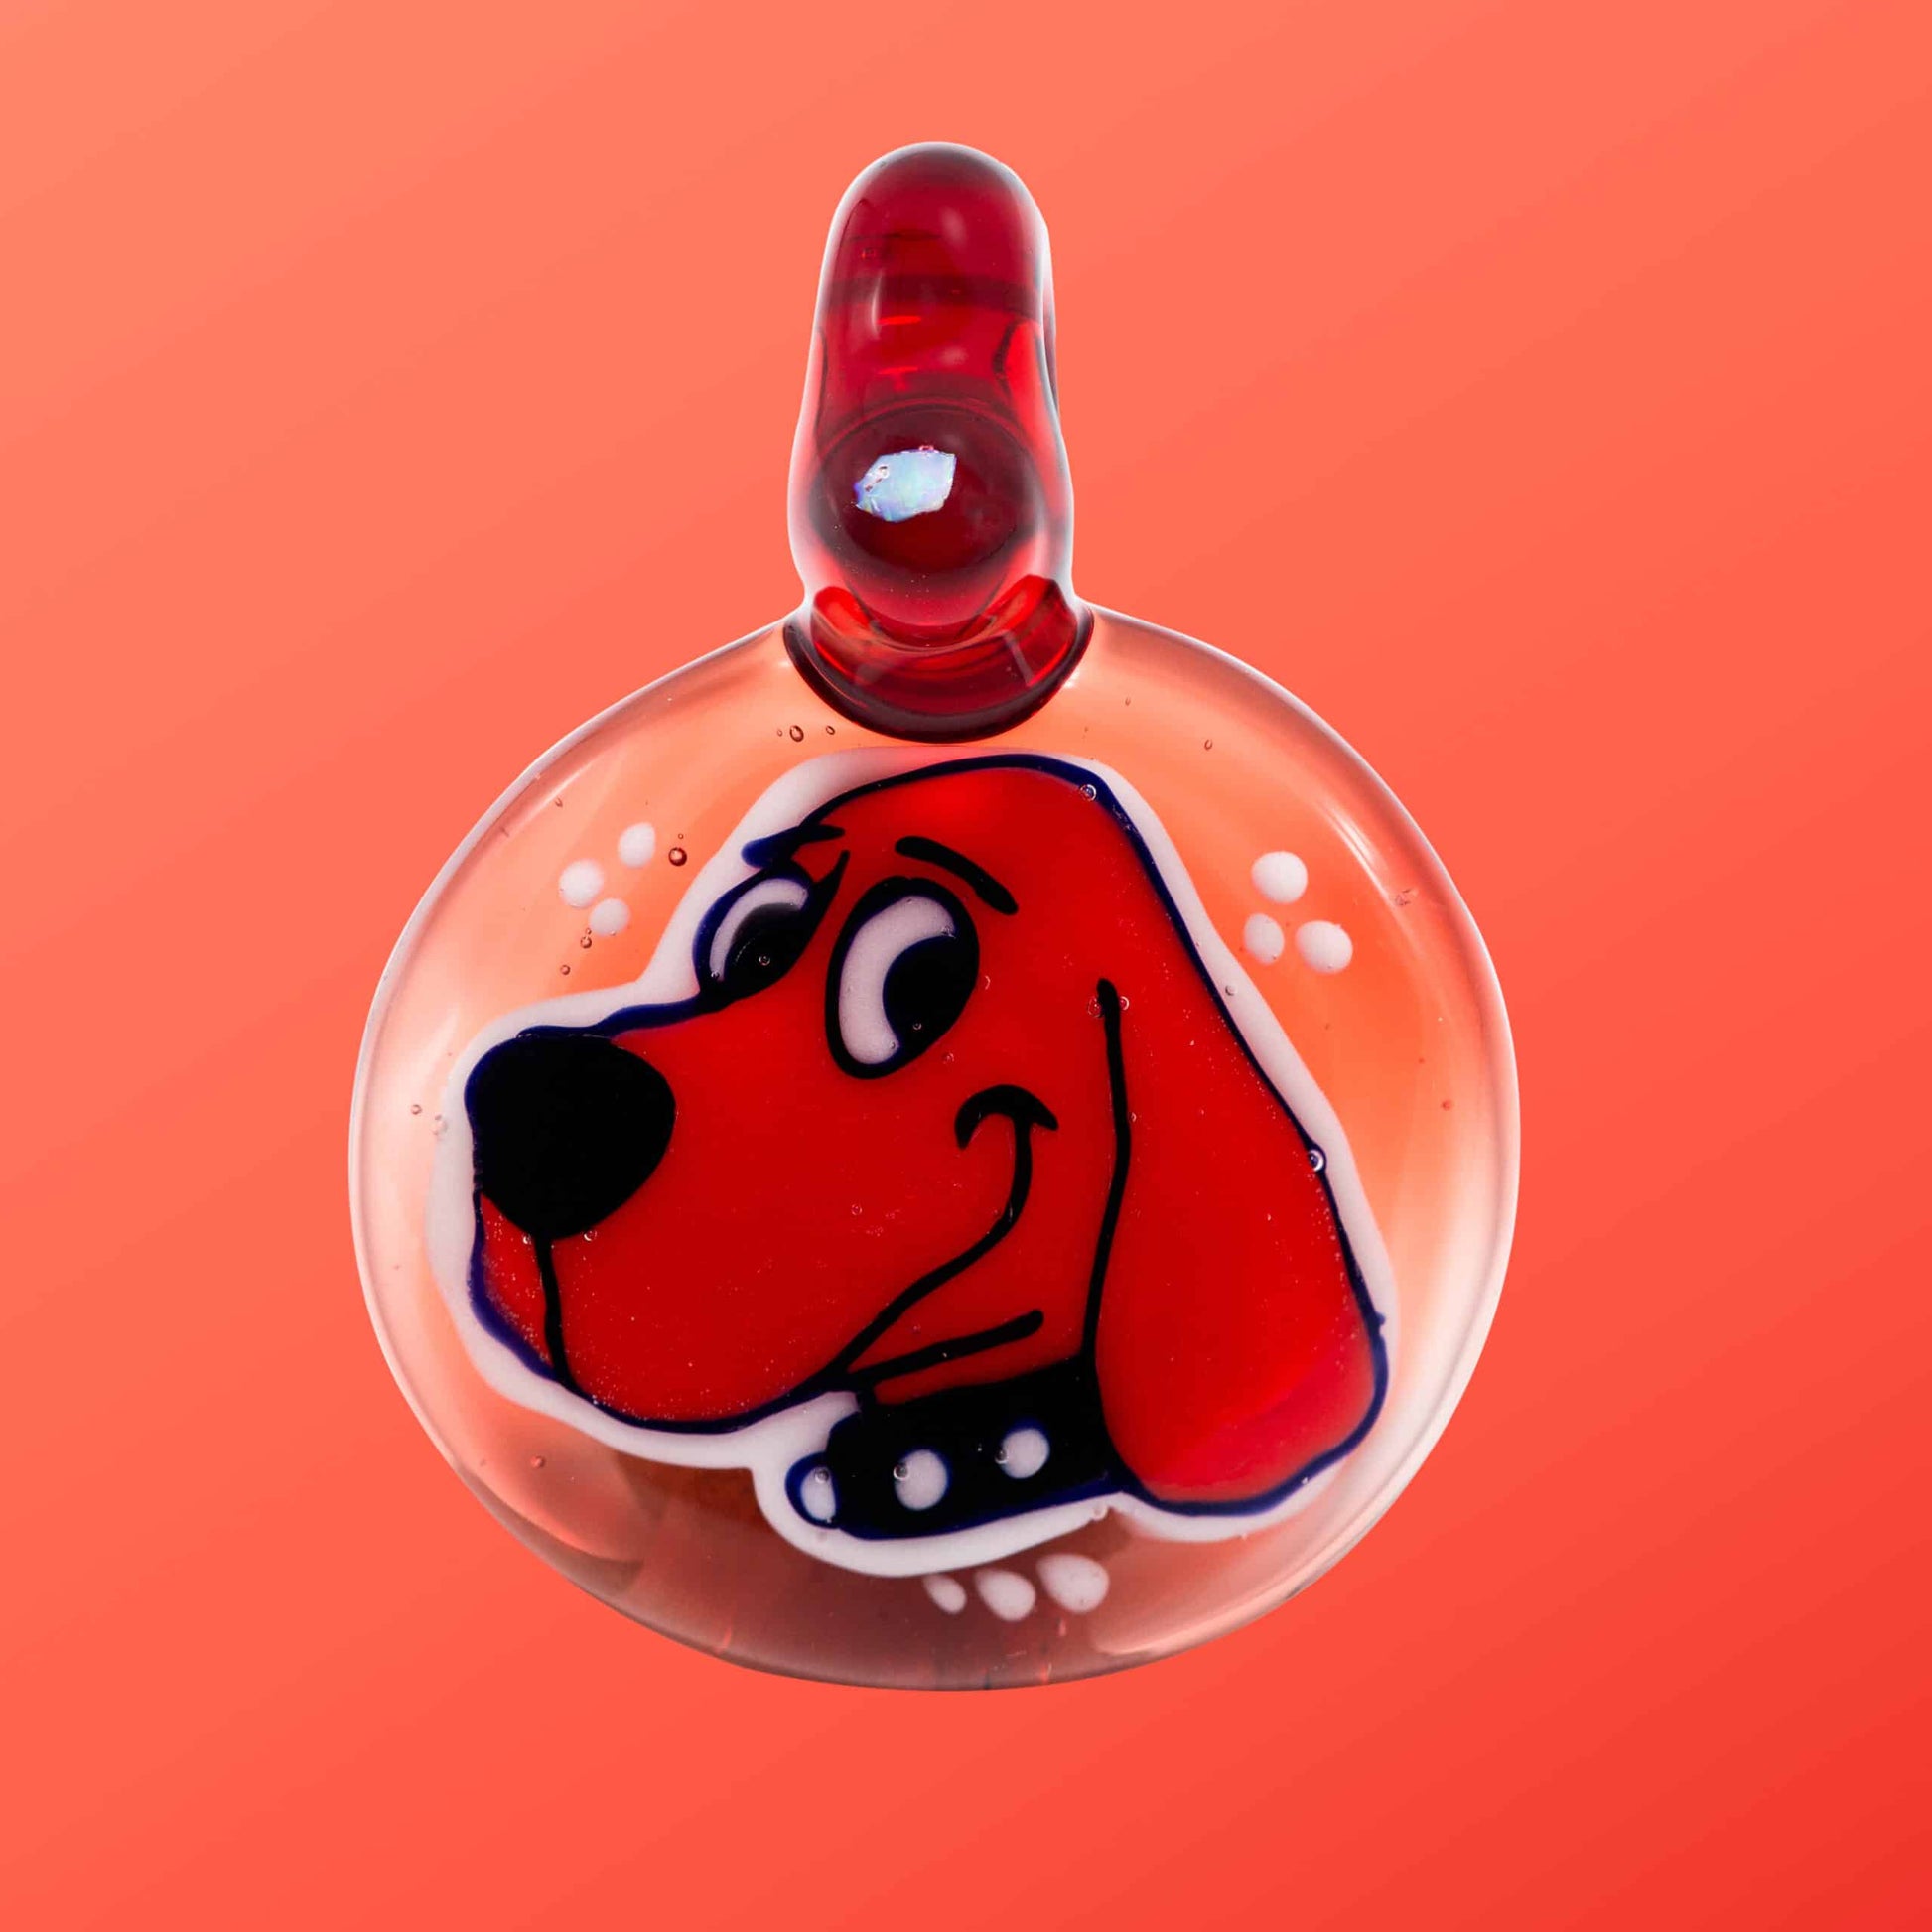 heady glass pendant - Clifford The Big Red Dog Pendant by Avi Glass